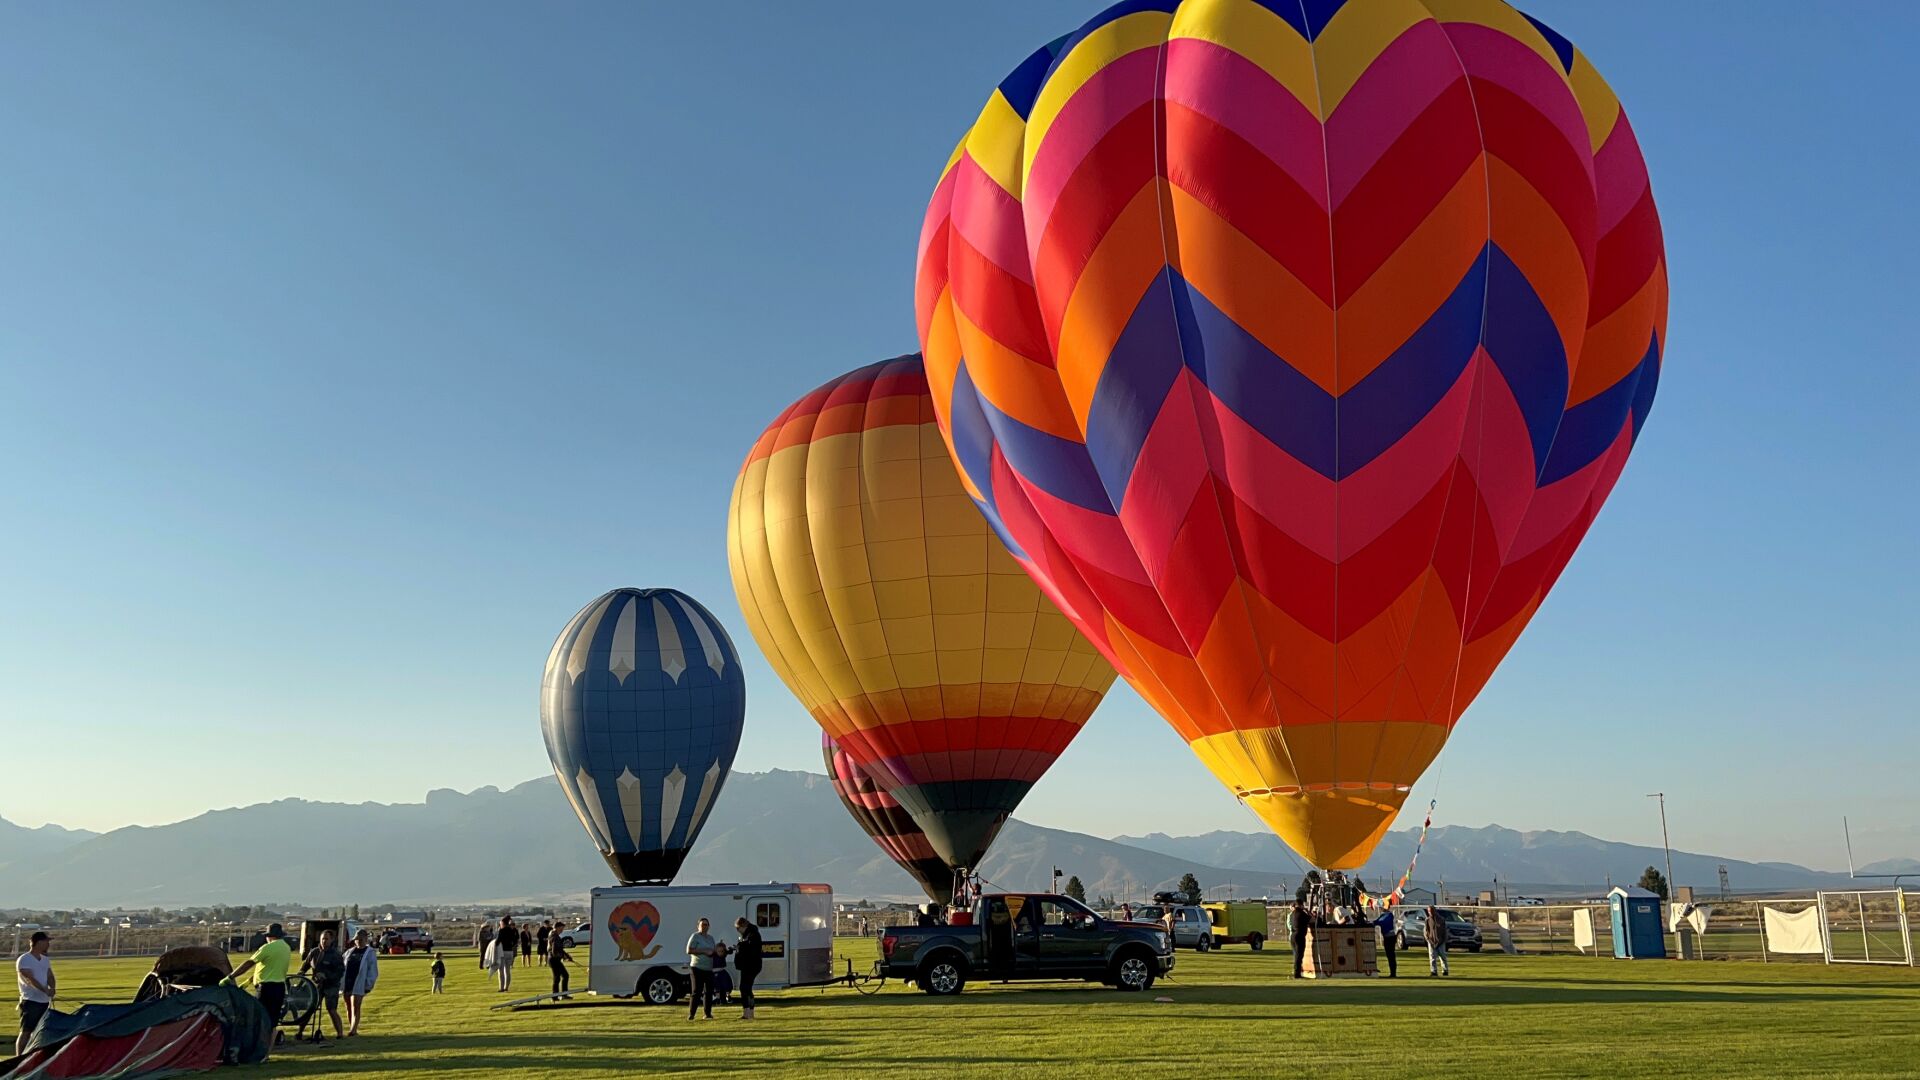 Ruby Mountain Balloon Festival welcomes hot air balloonists